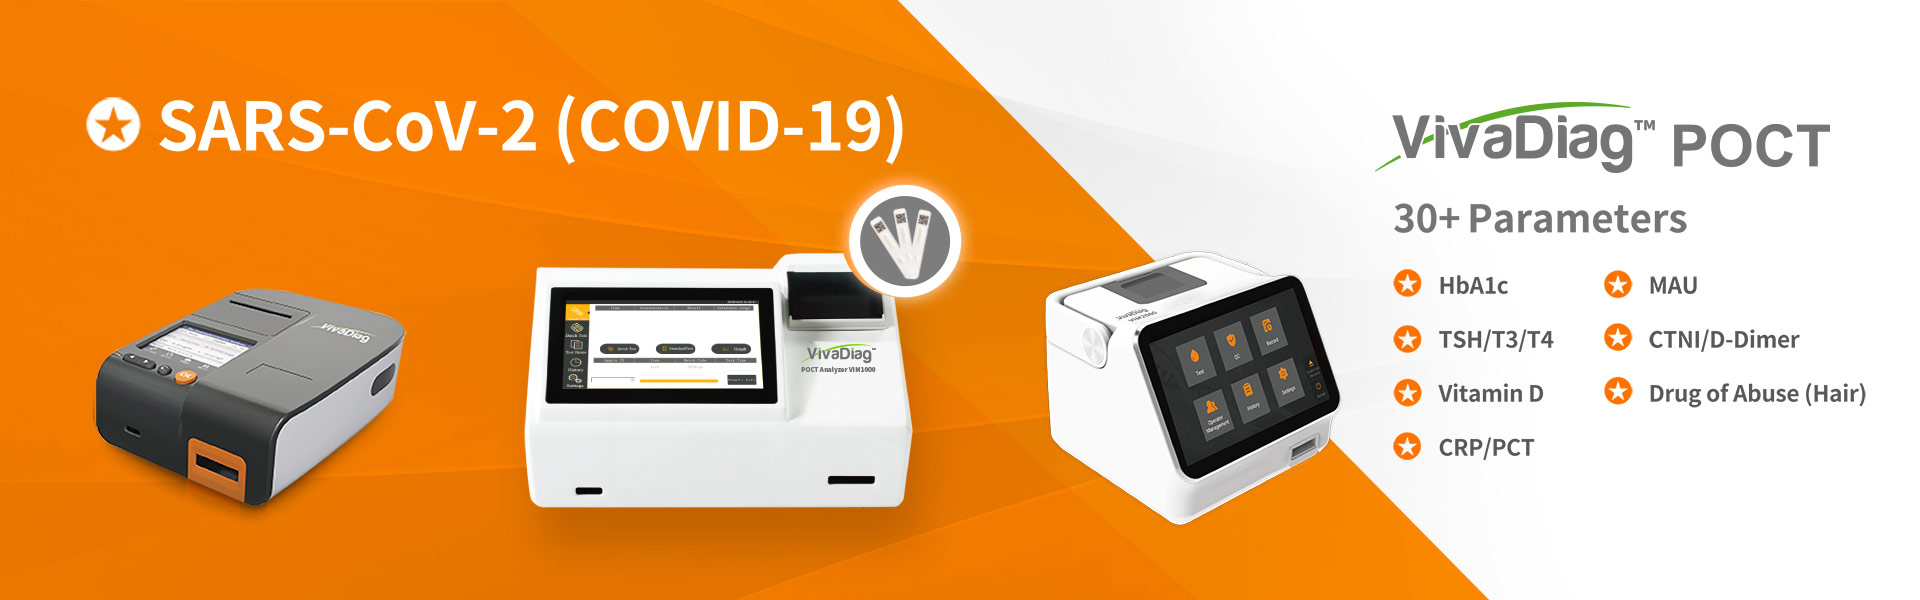 VivaDiag FIA Analyzer VIM001 uses the cutting-edge and innovative Fluorescence Immunochromatography technology, to generate test results in just few minutes.